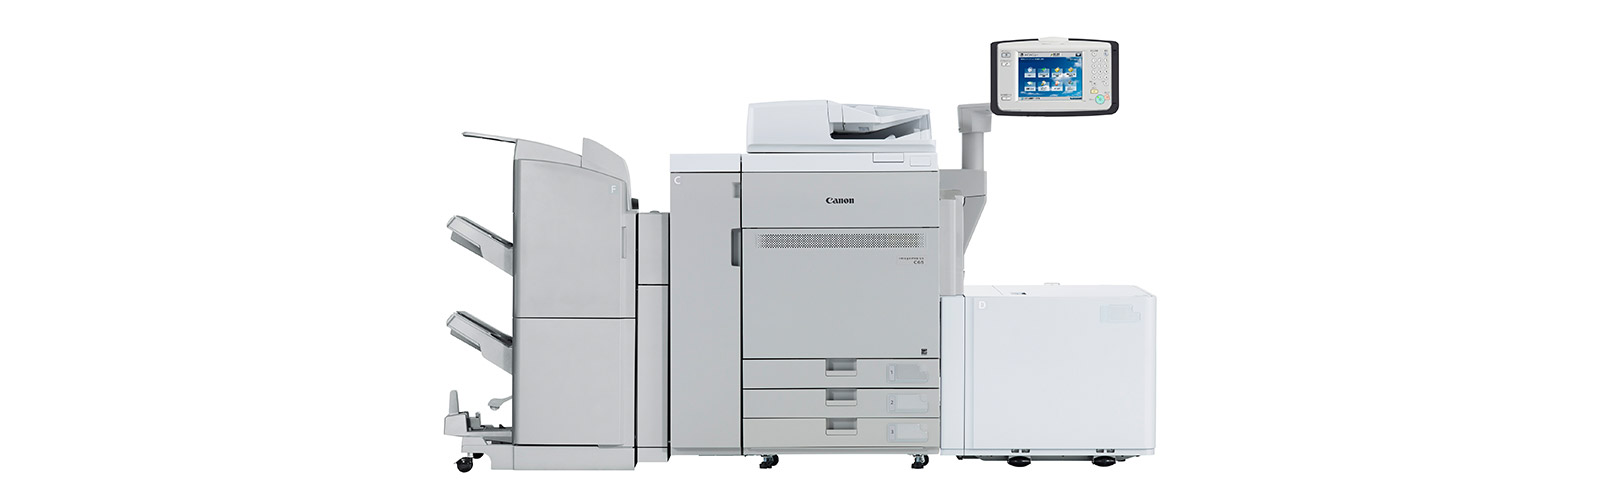 Canon imagePRESS C650 Production Print System